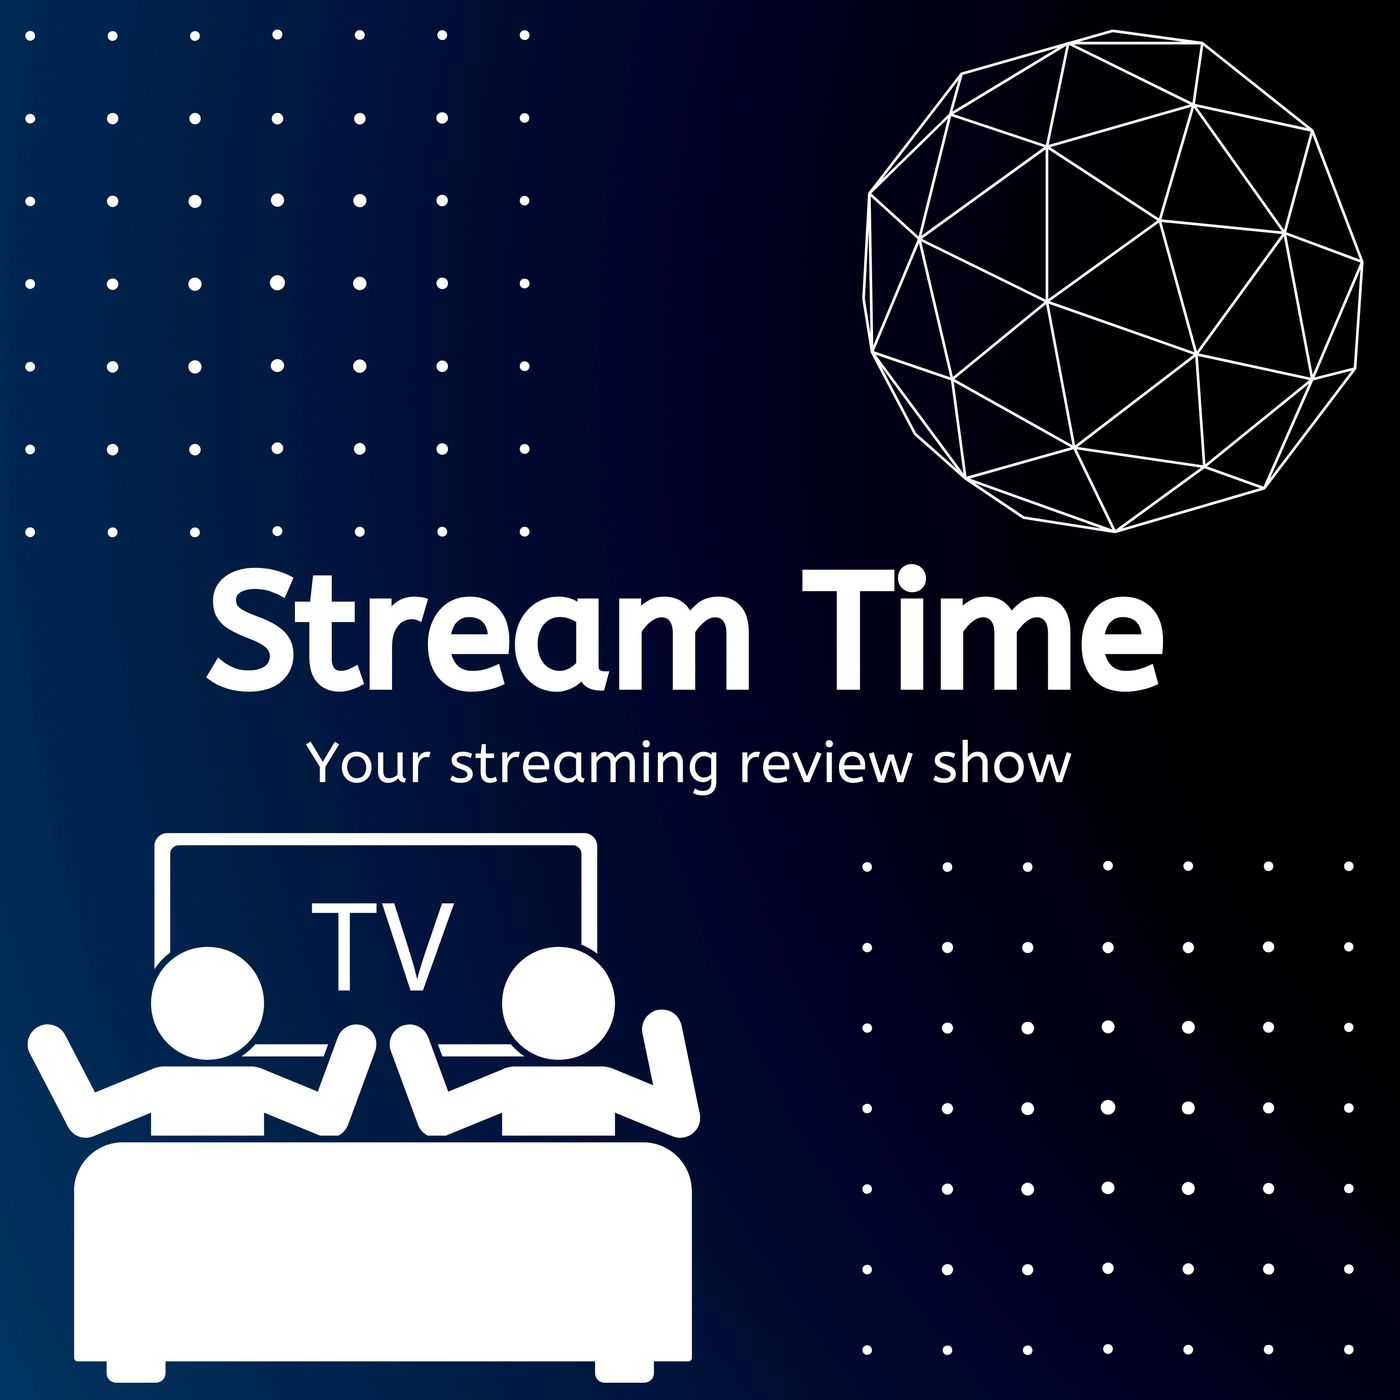 Stream Time Price Updates and New Seasons